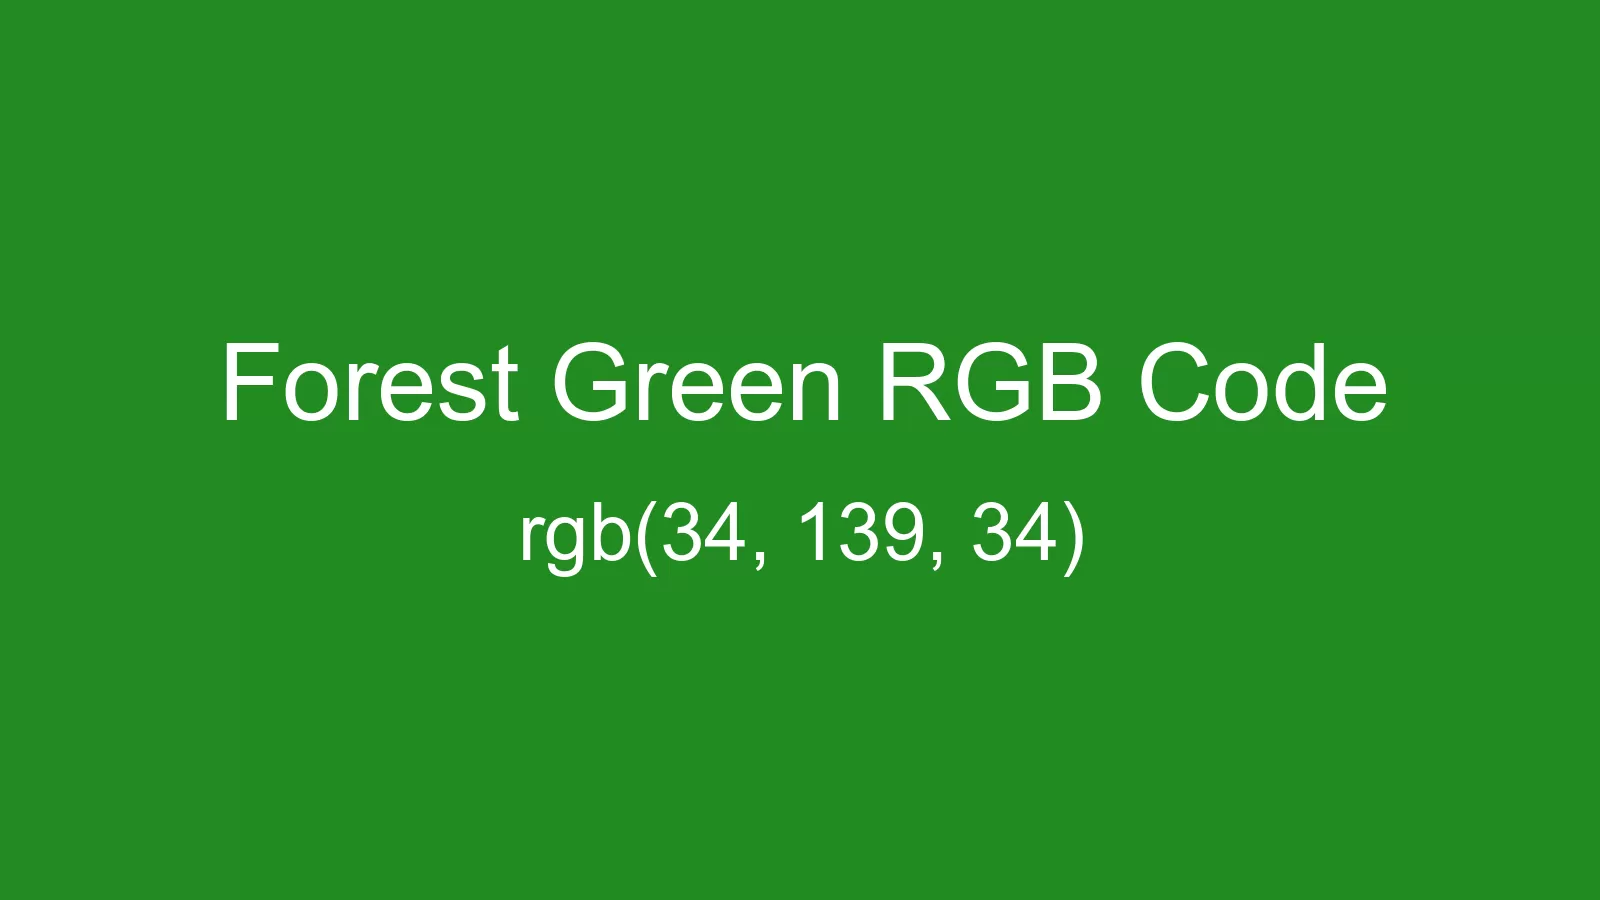 preview image of Forest Green color and RGB code